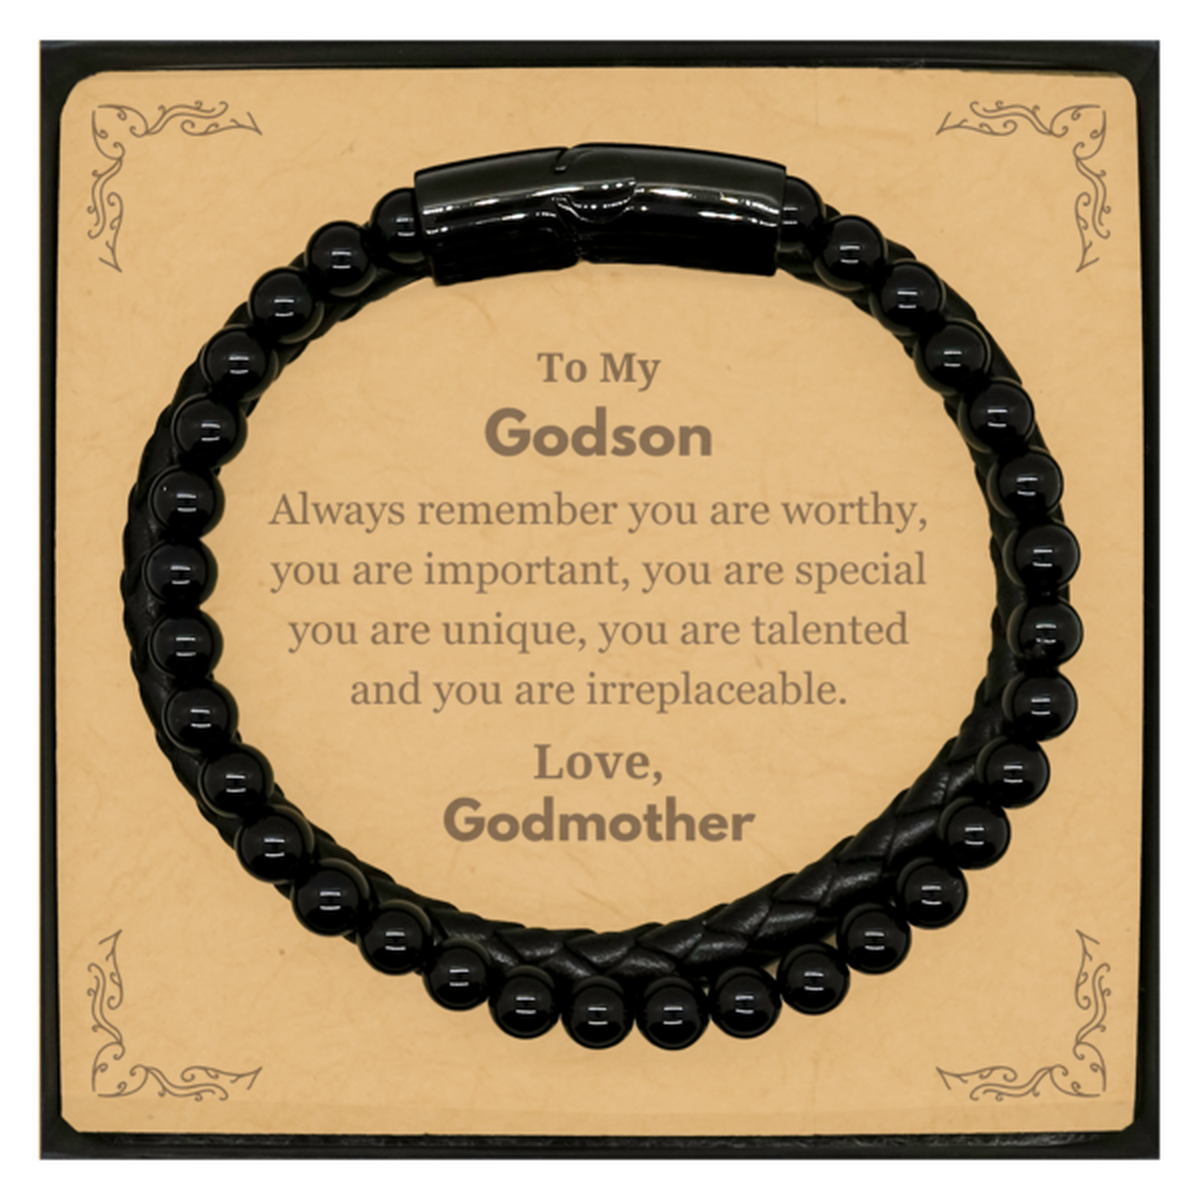 Godson Birthday Gifts from Godmother, Inspirational Stone Leather Bracelets for Godson Christmas Graduation Gifts for Godson Always remember you are worthy, you are important. Love, Godmother